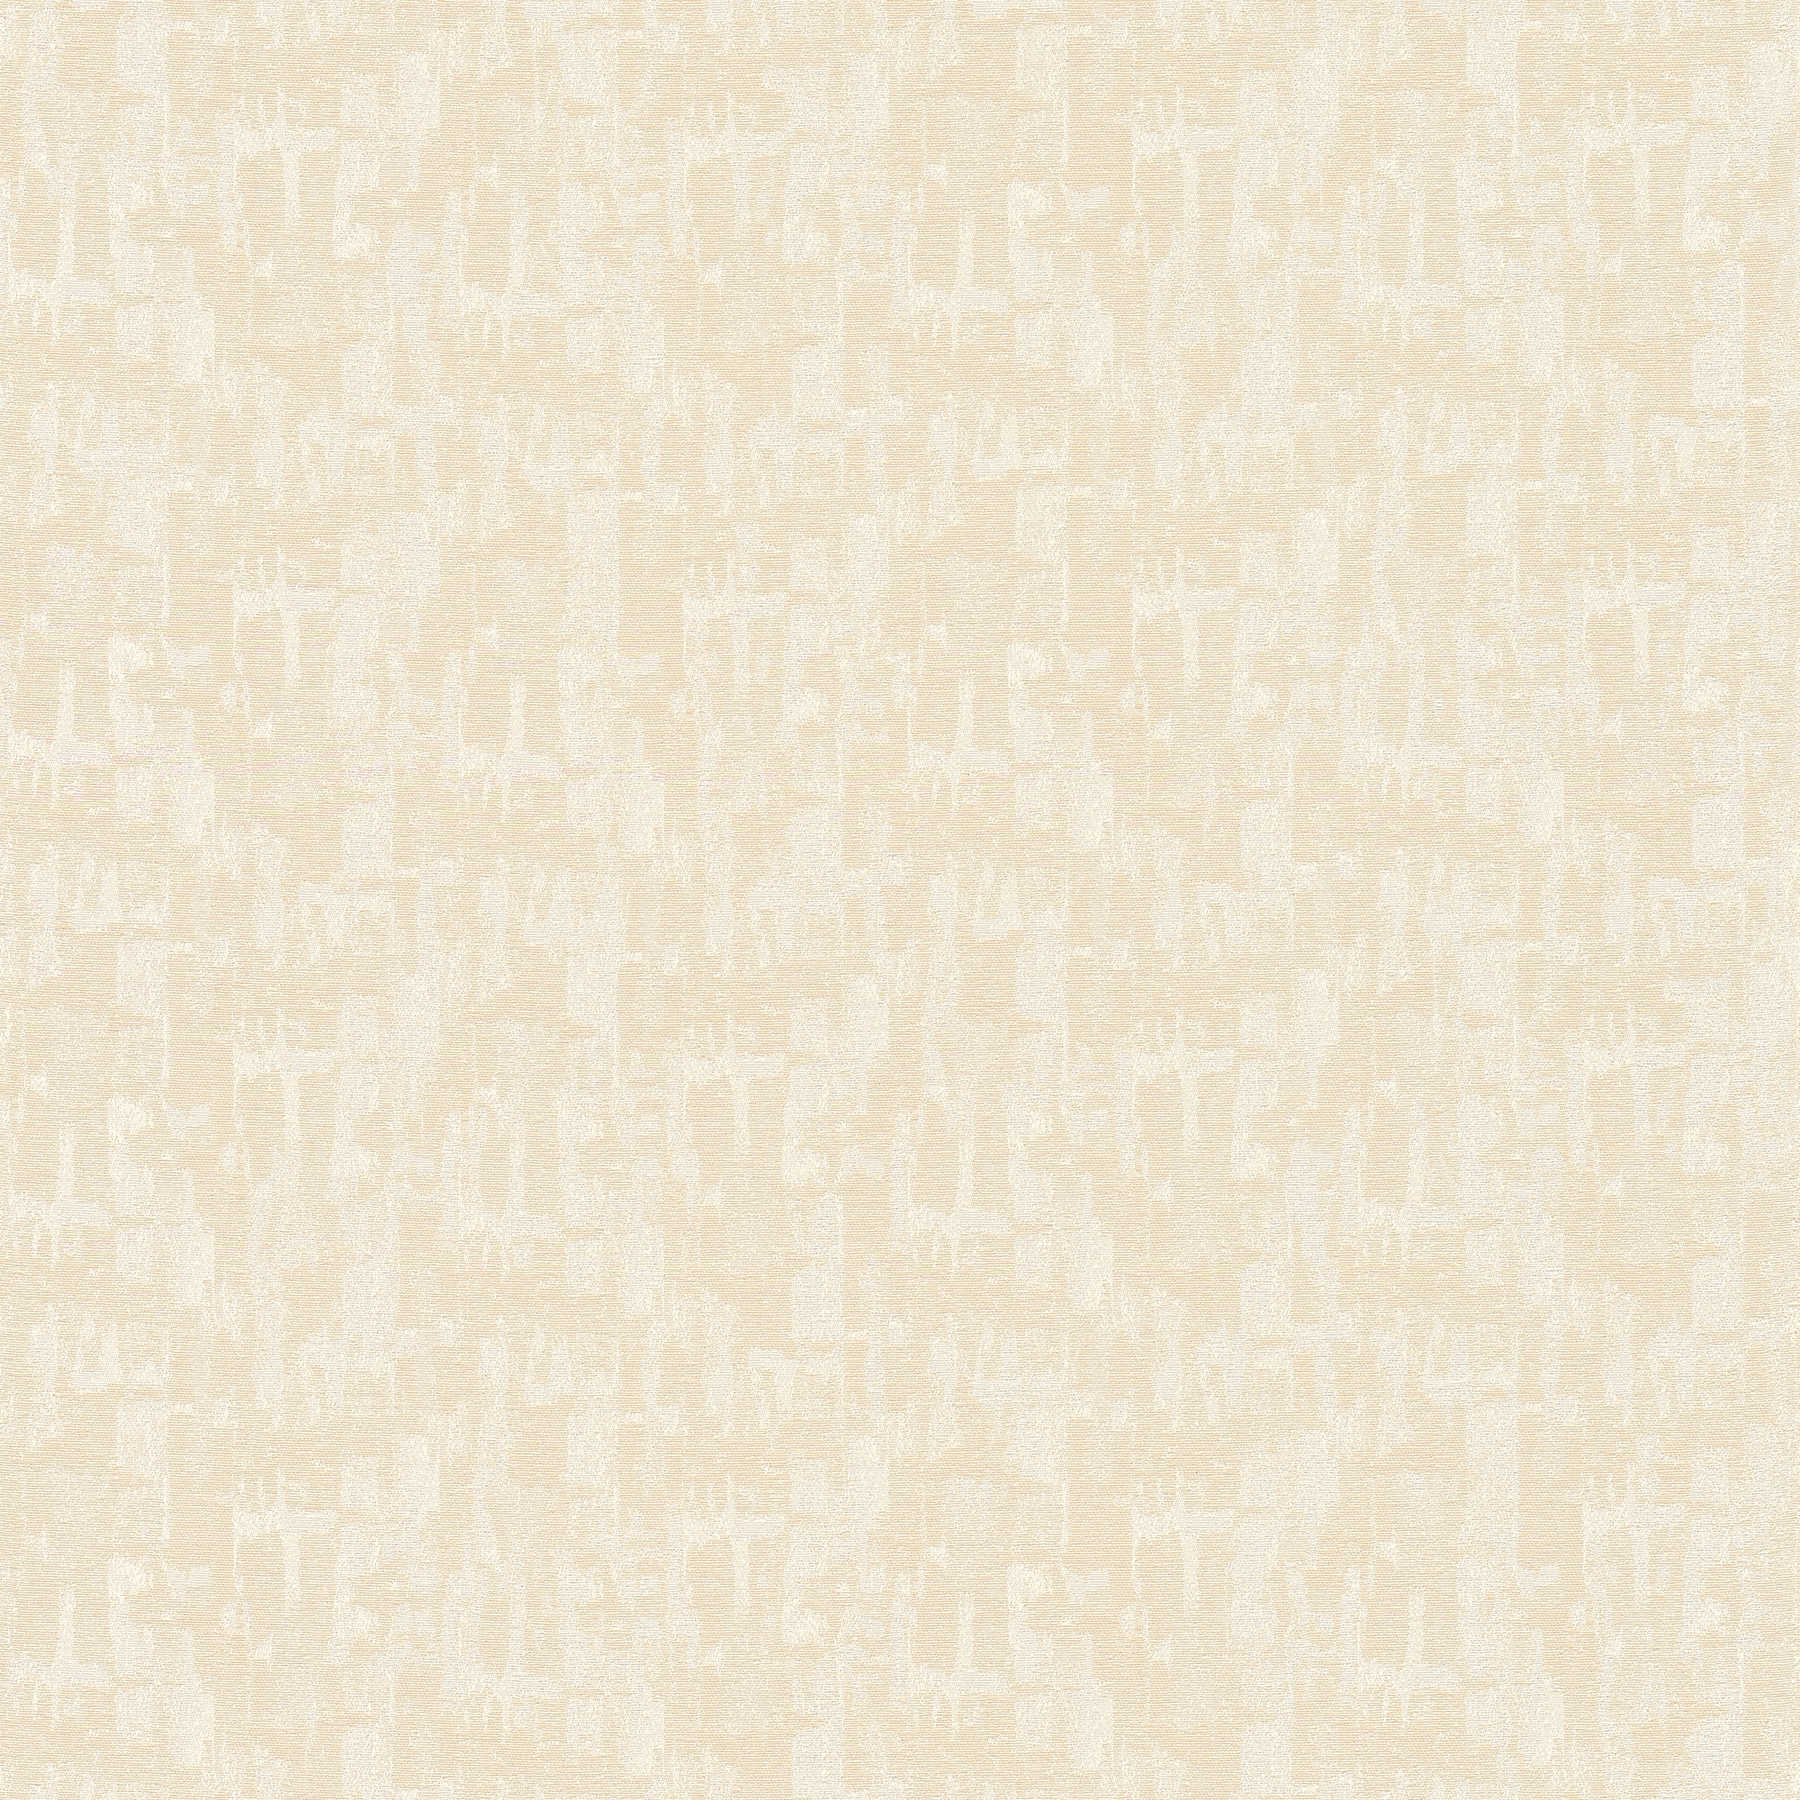 Retro wallpaper with abstract cream and beige pattern
